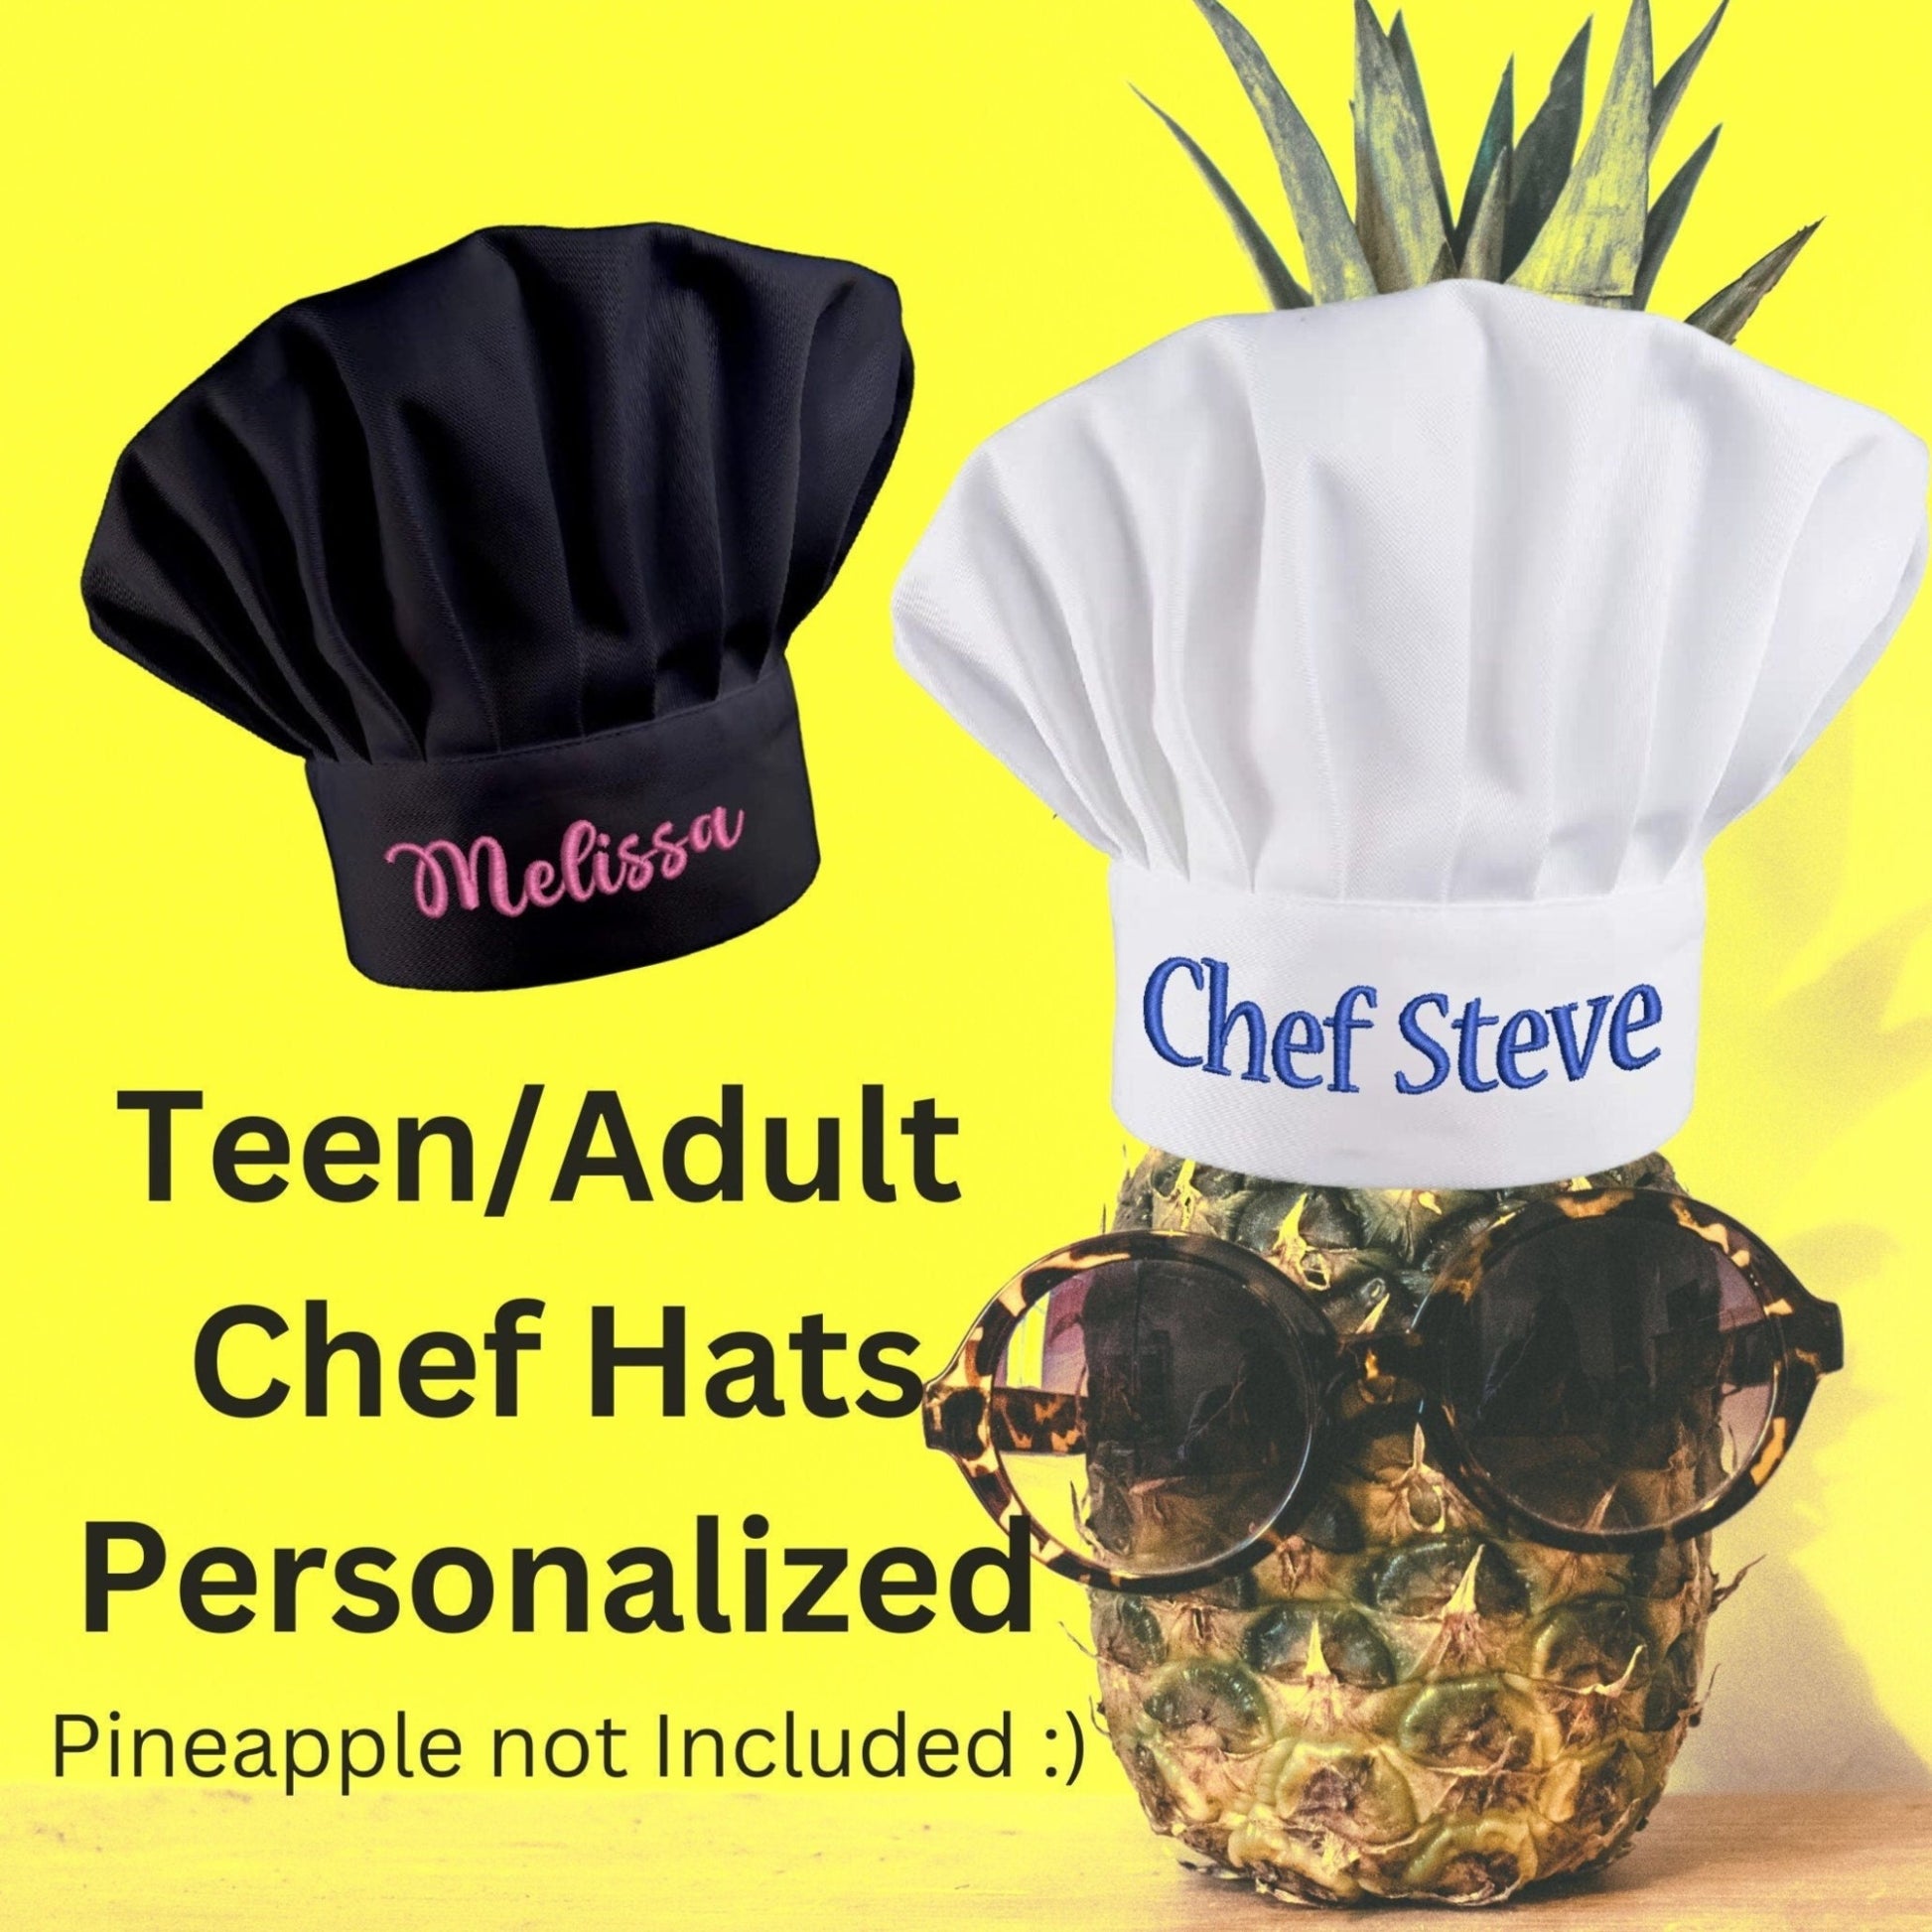 Photo of personalized white and black chef hats